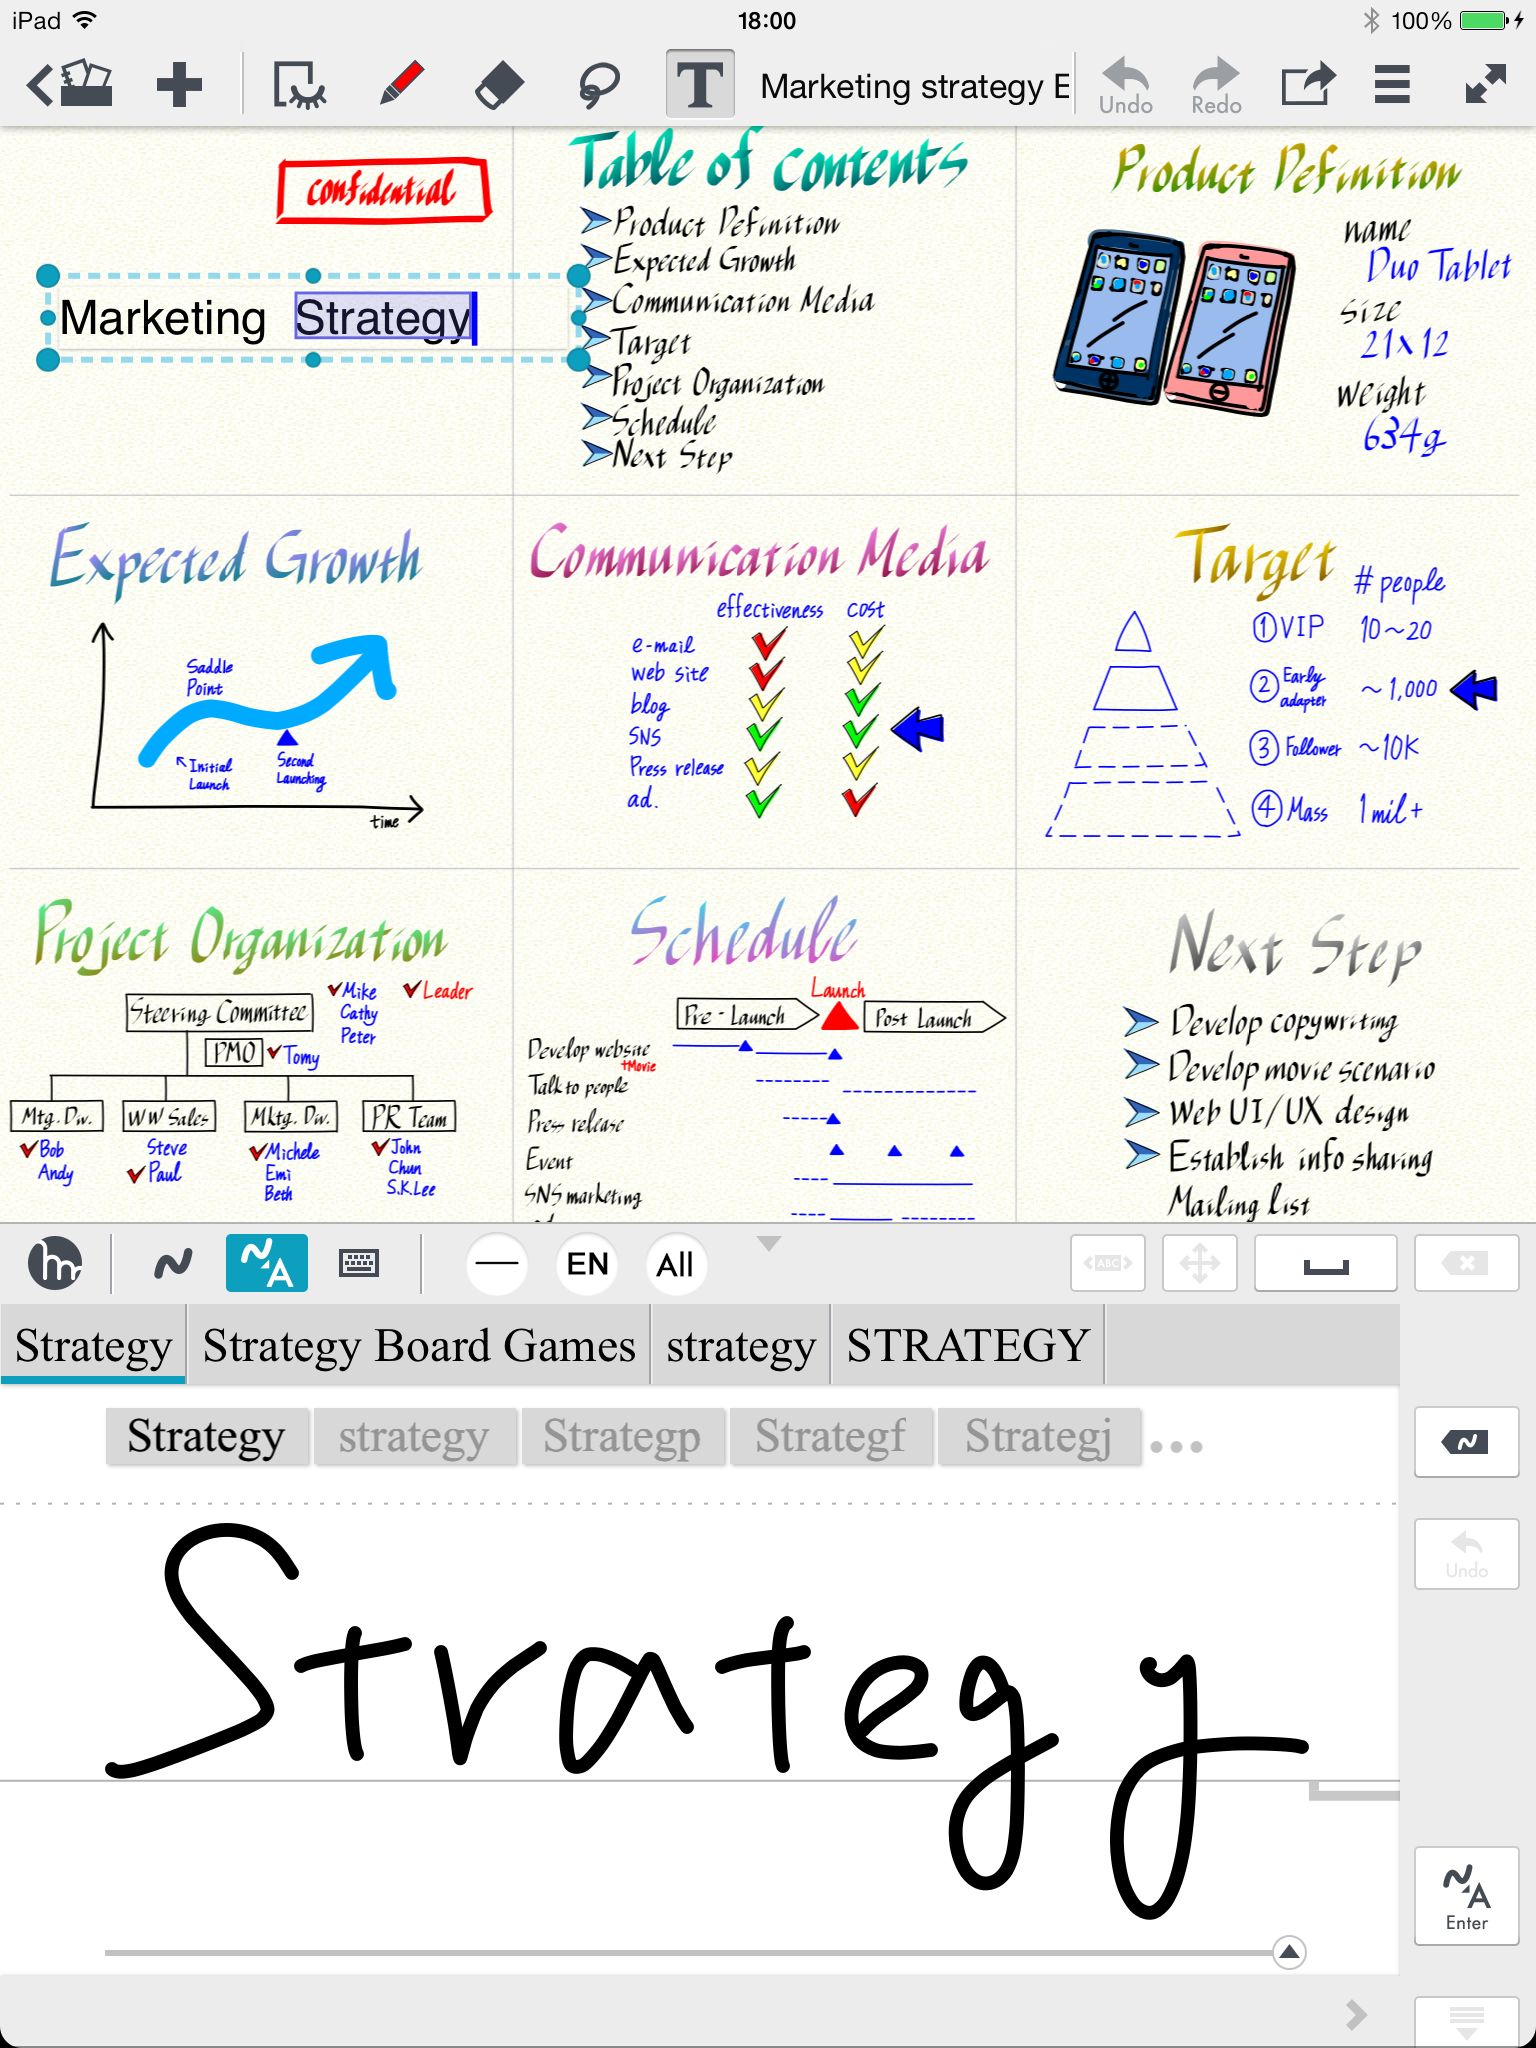 Students Can Handwrite and Sketch Notes